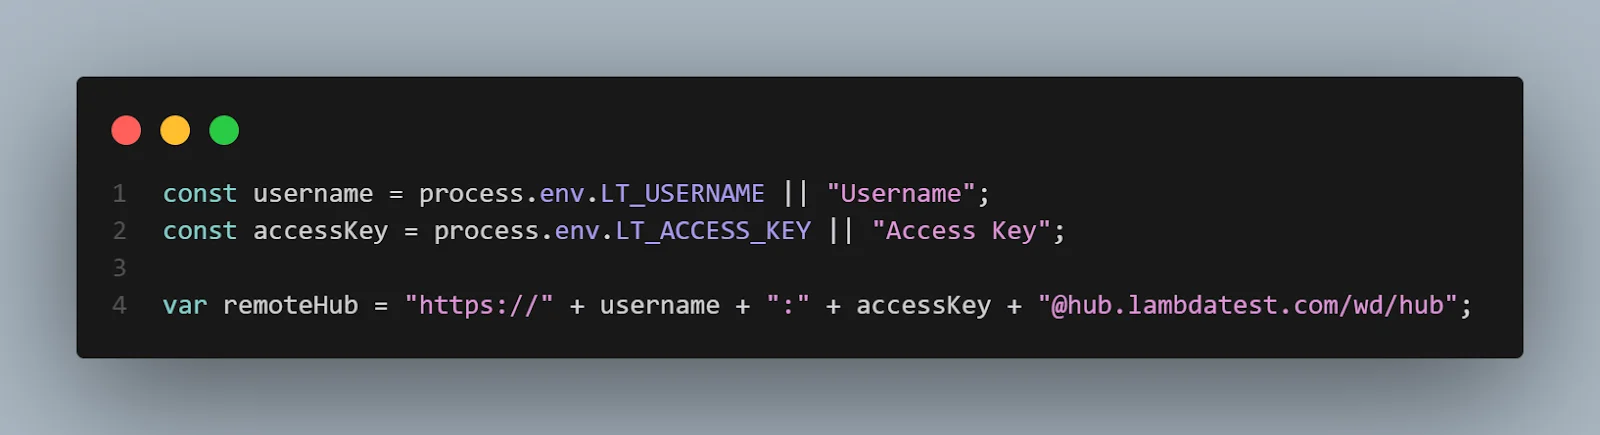 variables-username-accesskey